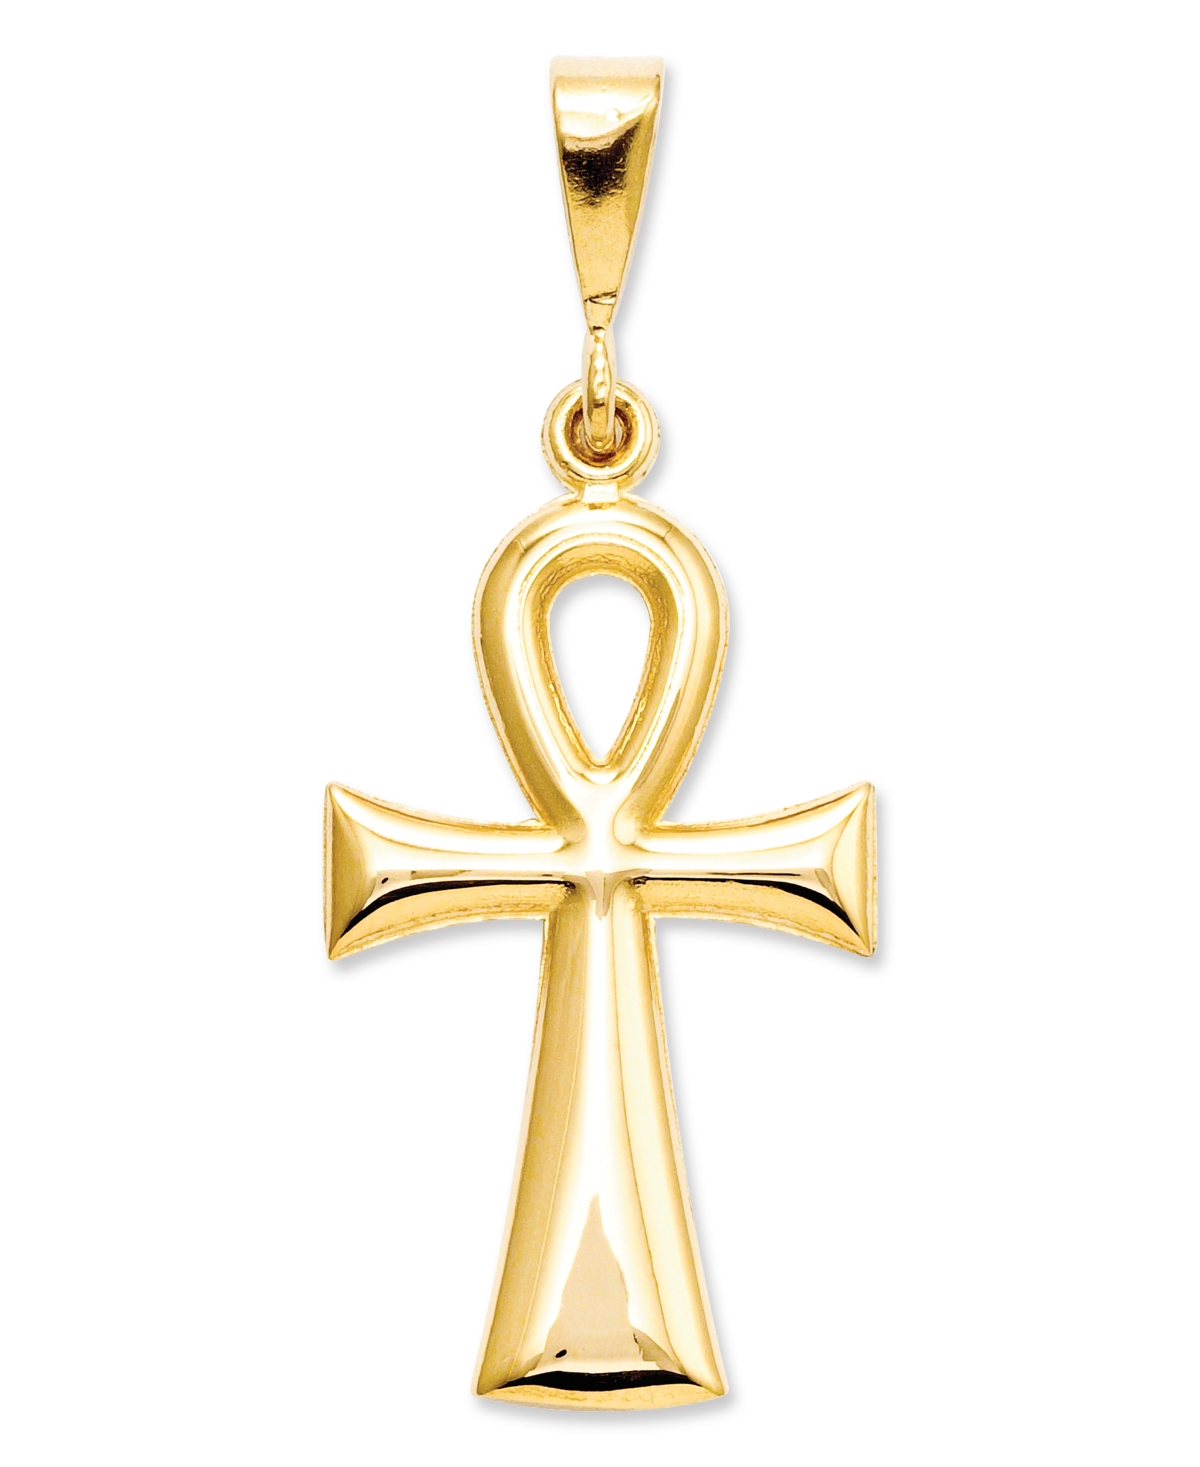 Details about   14K Gold Egyptian Ankh Religious Cross Charm Pendant For Necklace or Chain 